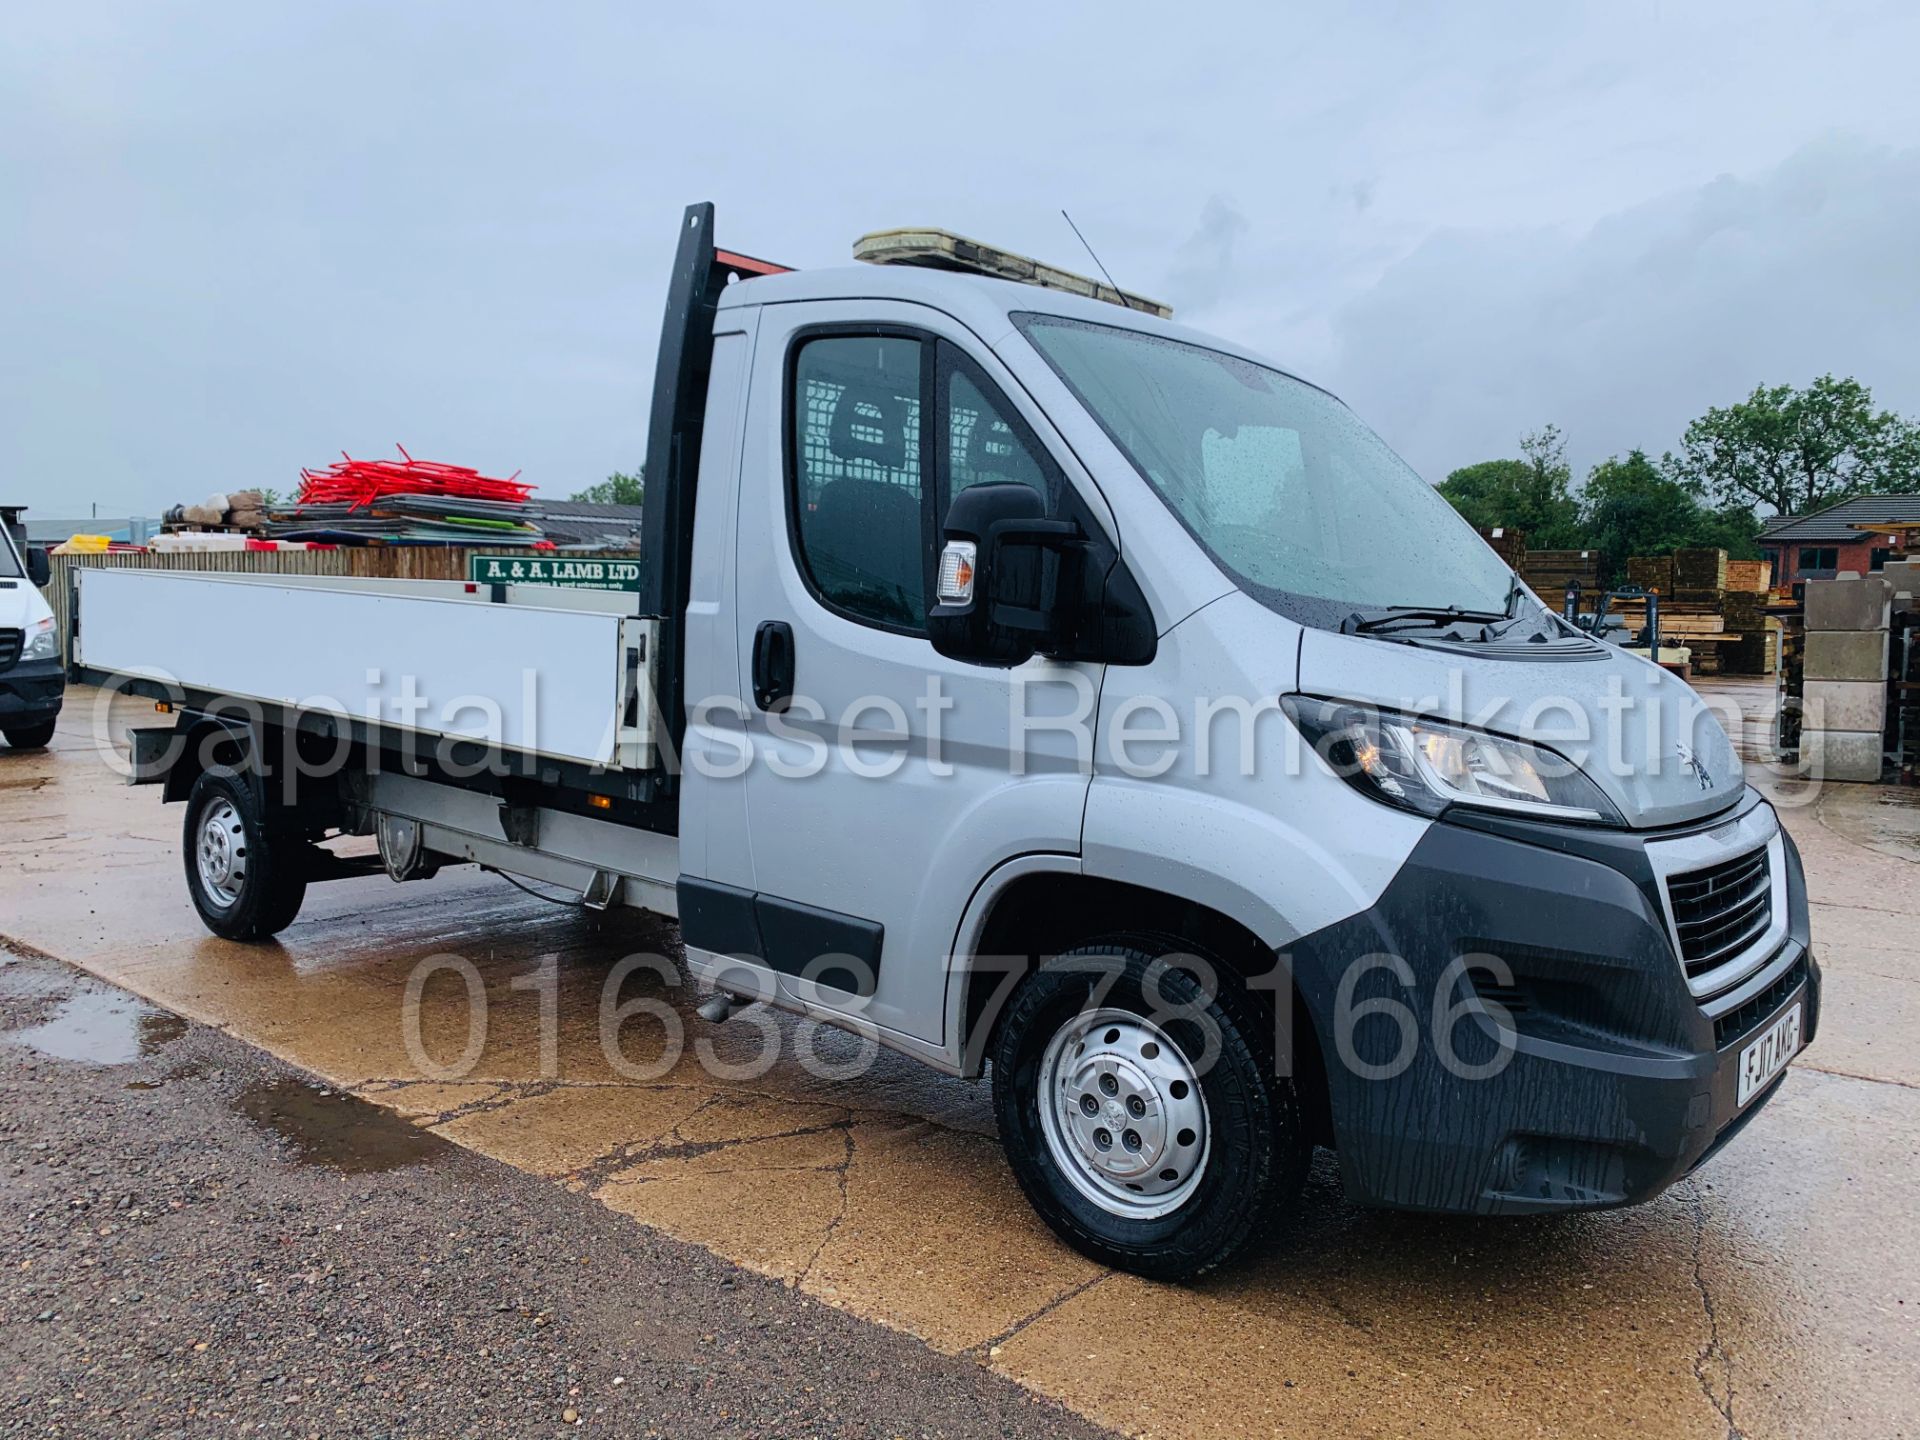 PEUGEOT BOXER 335 *LWB - DROPSIDE TRUCK* (2017 - EURO 6) '2.0 BLUE HDI -130 BHP - 6 SPEED' (1 OWNER) - Image 2 of 37